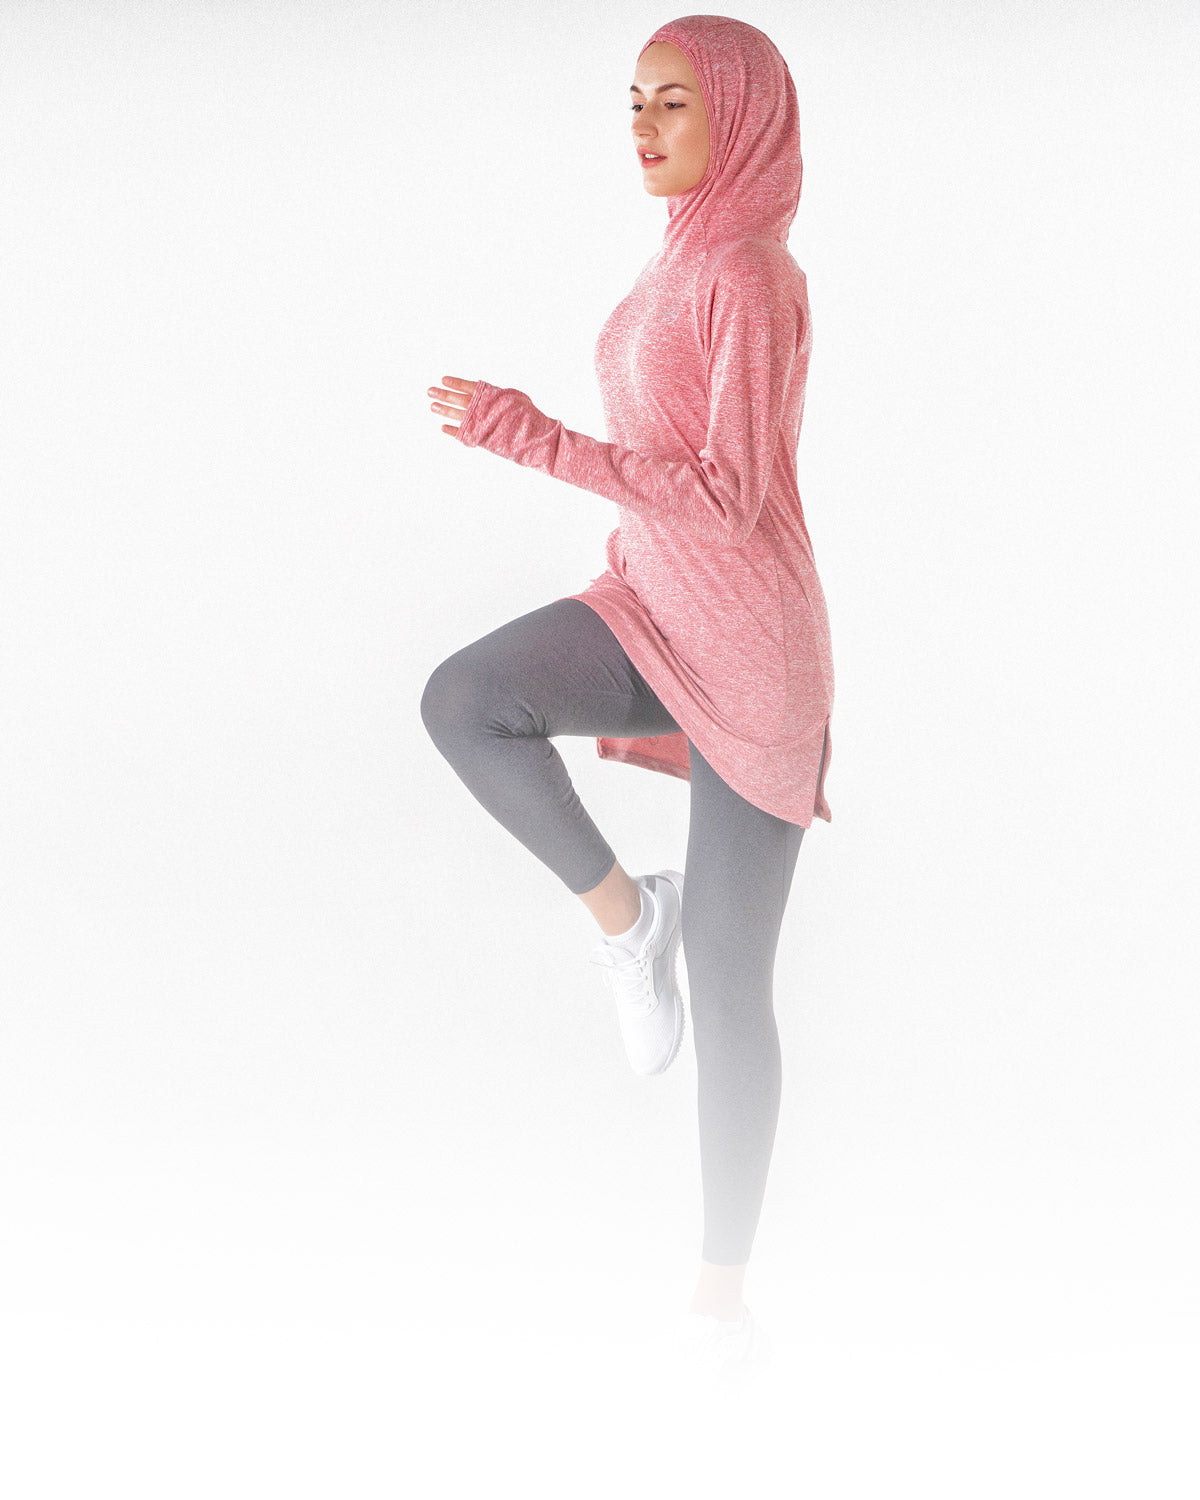 A female working out in the heathered red Halo Running Hoodie, a modest sportswear sweatshirt from Veil Garments.